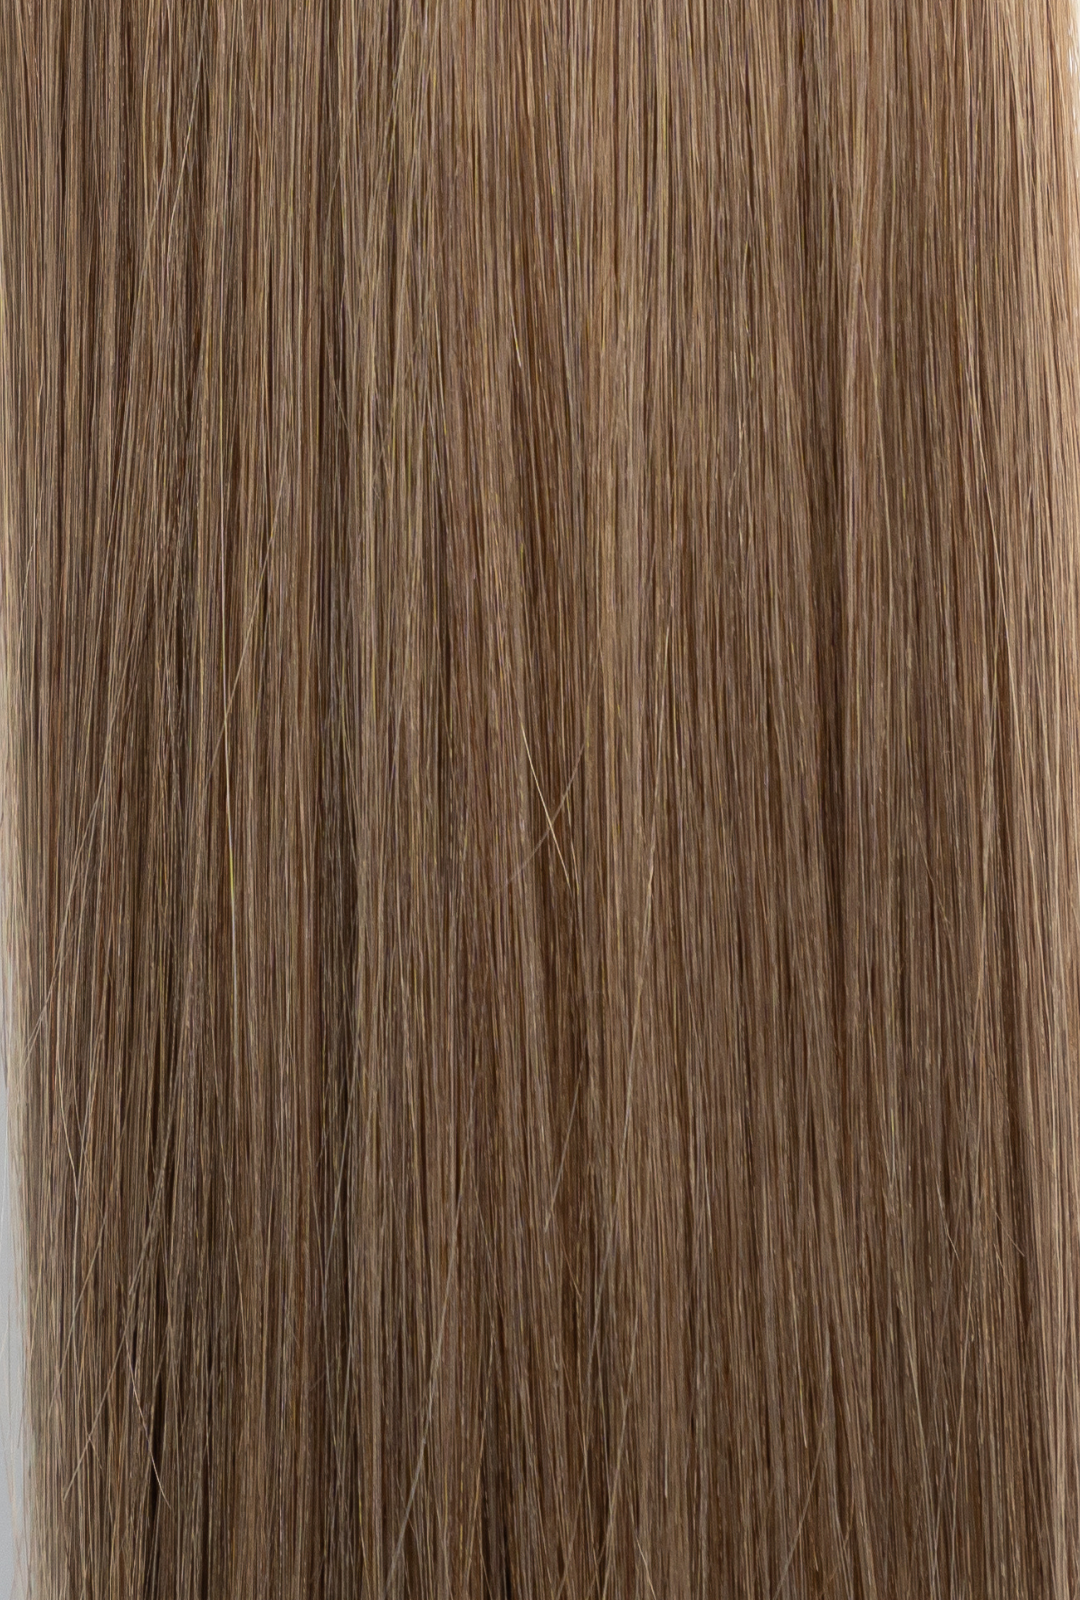 Laced Hair I-Tip Extensions #8